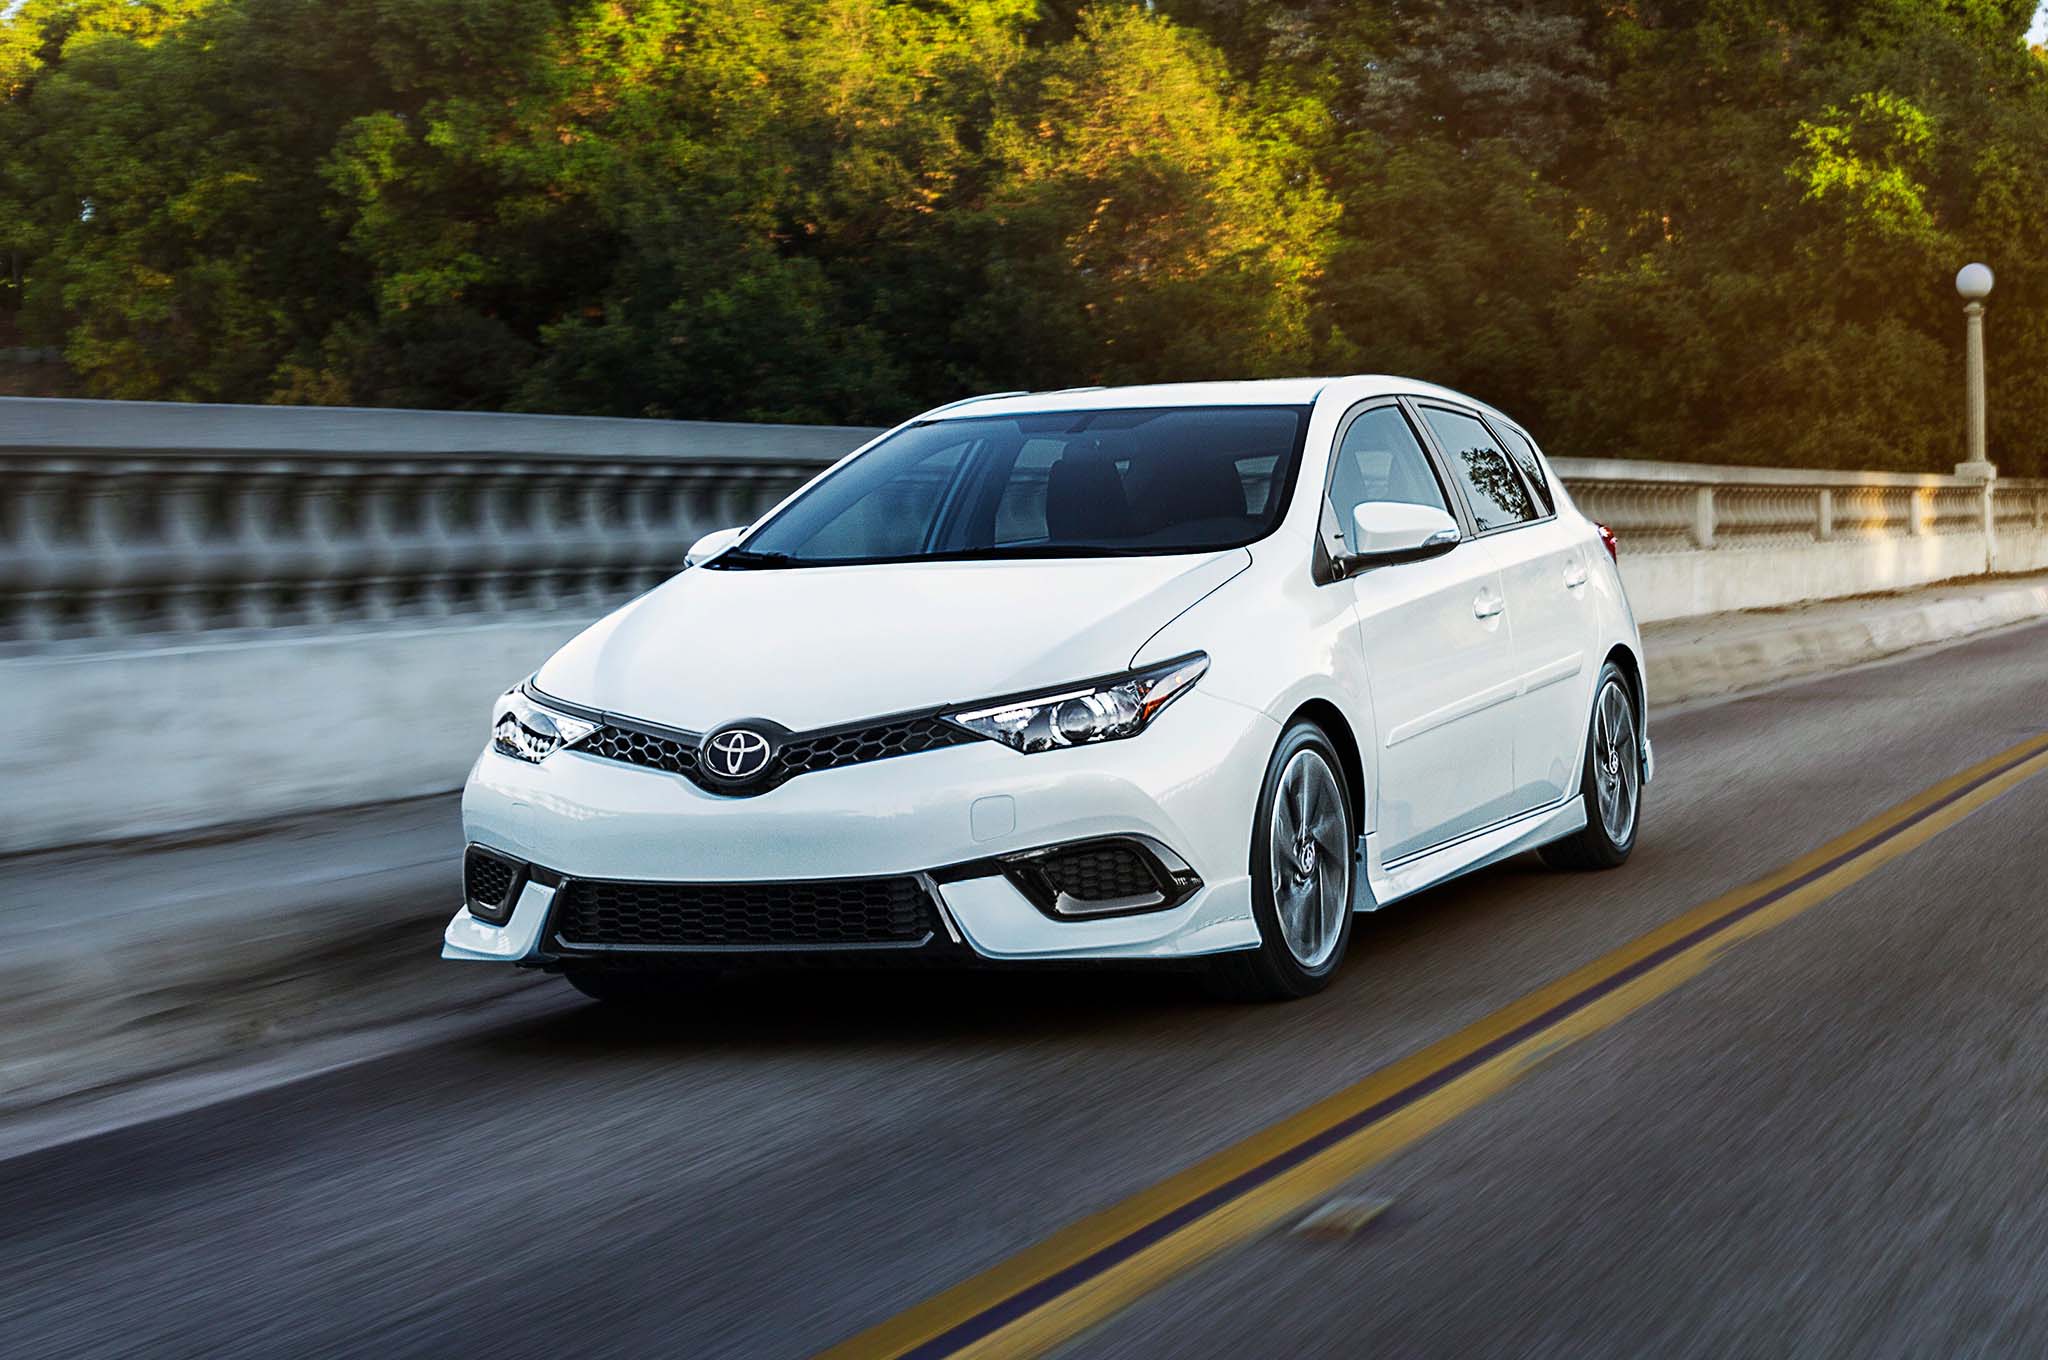 2017 Toyota Corolla iM - KBB.com 10 Coolest Cars: Sculpted styling and a versatile hatchback design deliver youthful appeal, while an impressive suite of standard safety equipment provides relaxing peace of mind.